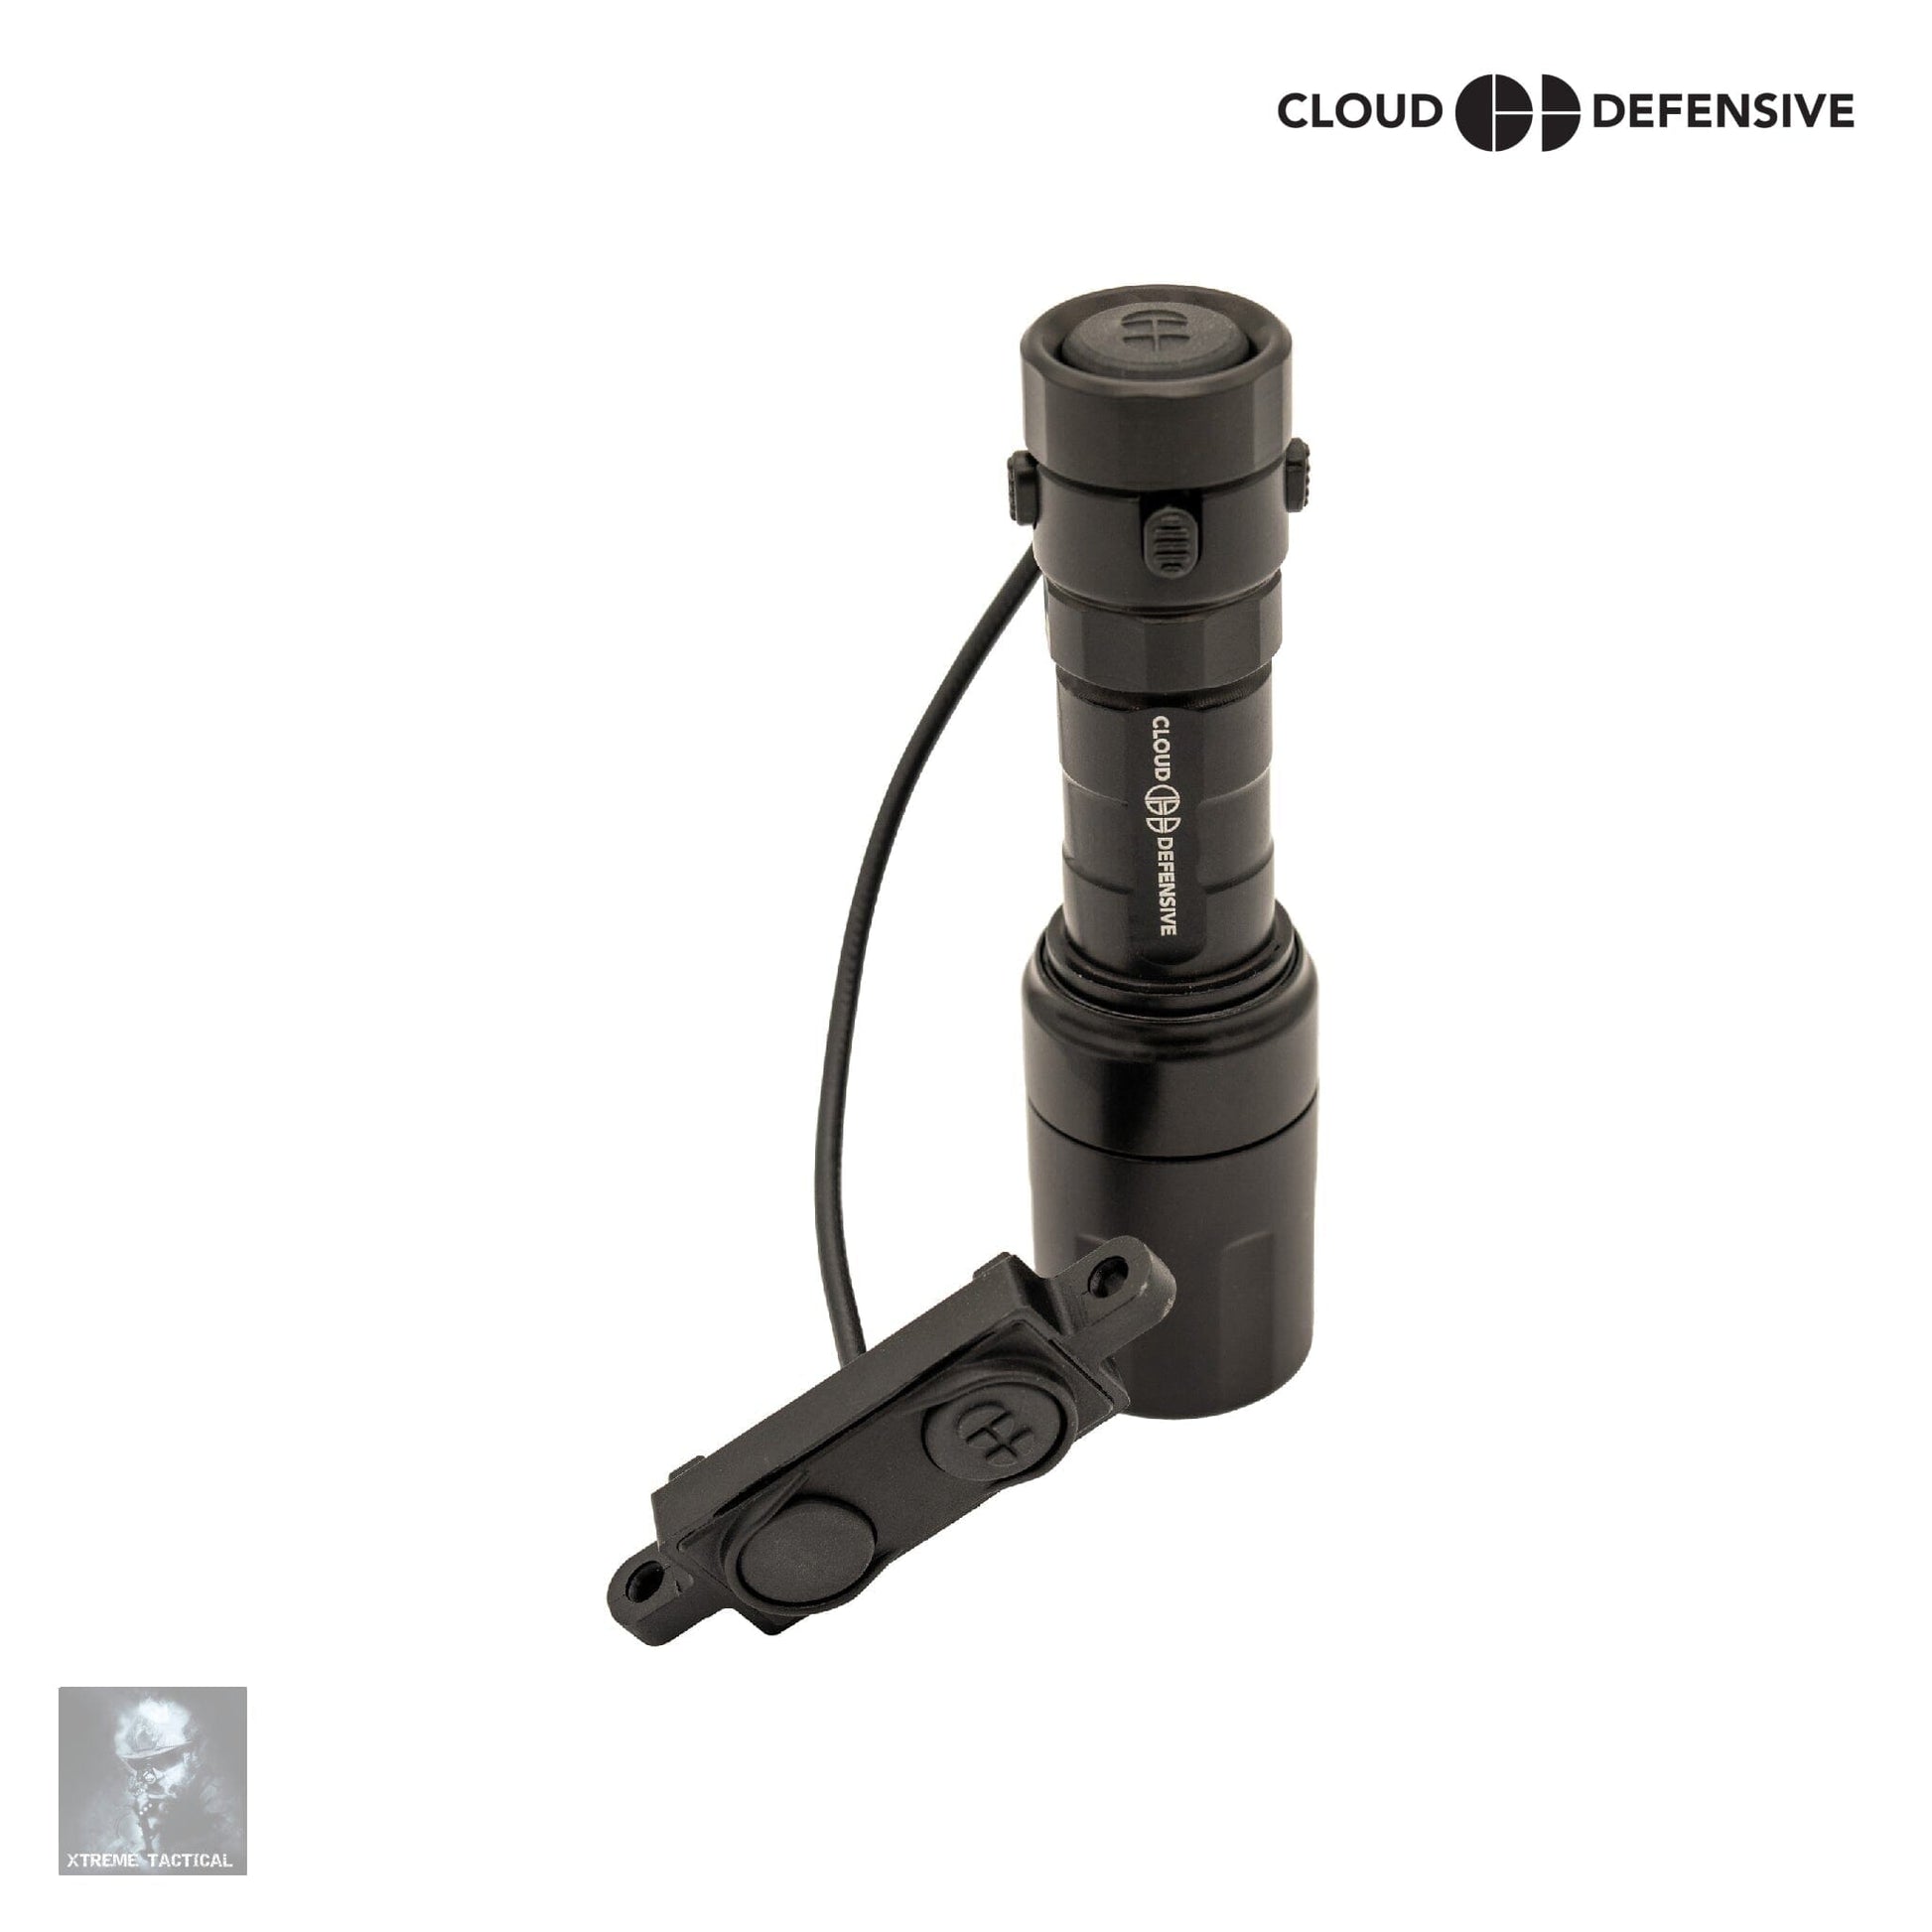 Cloud Defensive REIN 3.0 Micro Weapon Light Weapon Light Cloud Defensive 